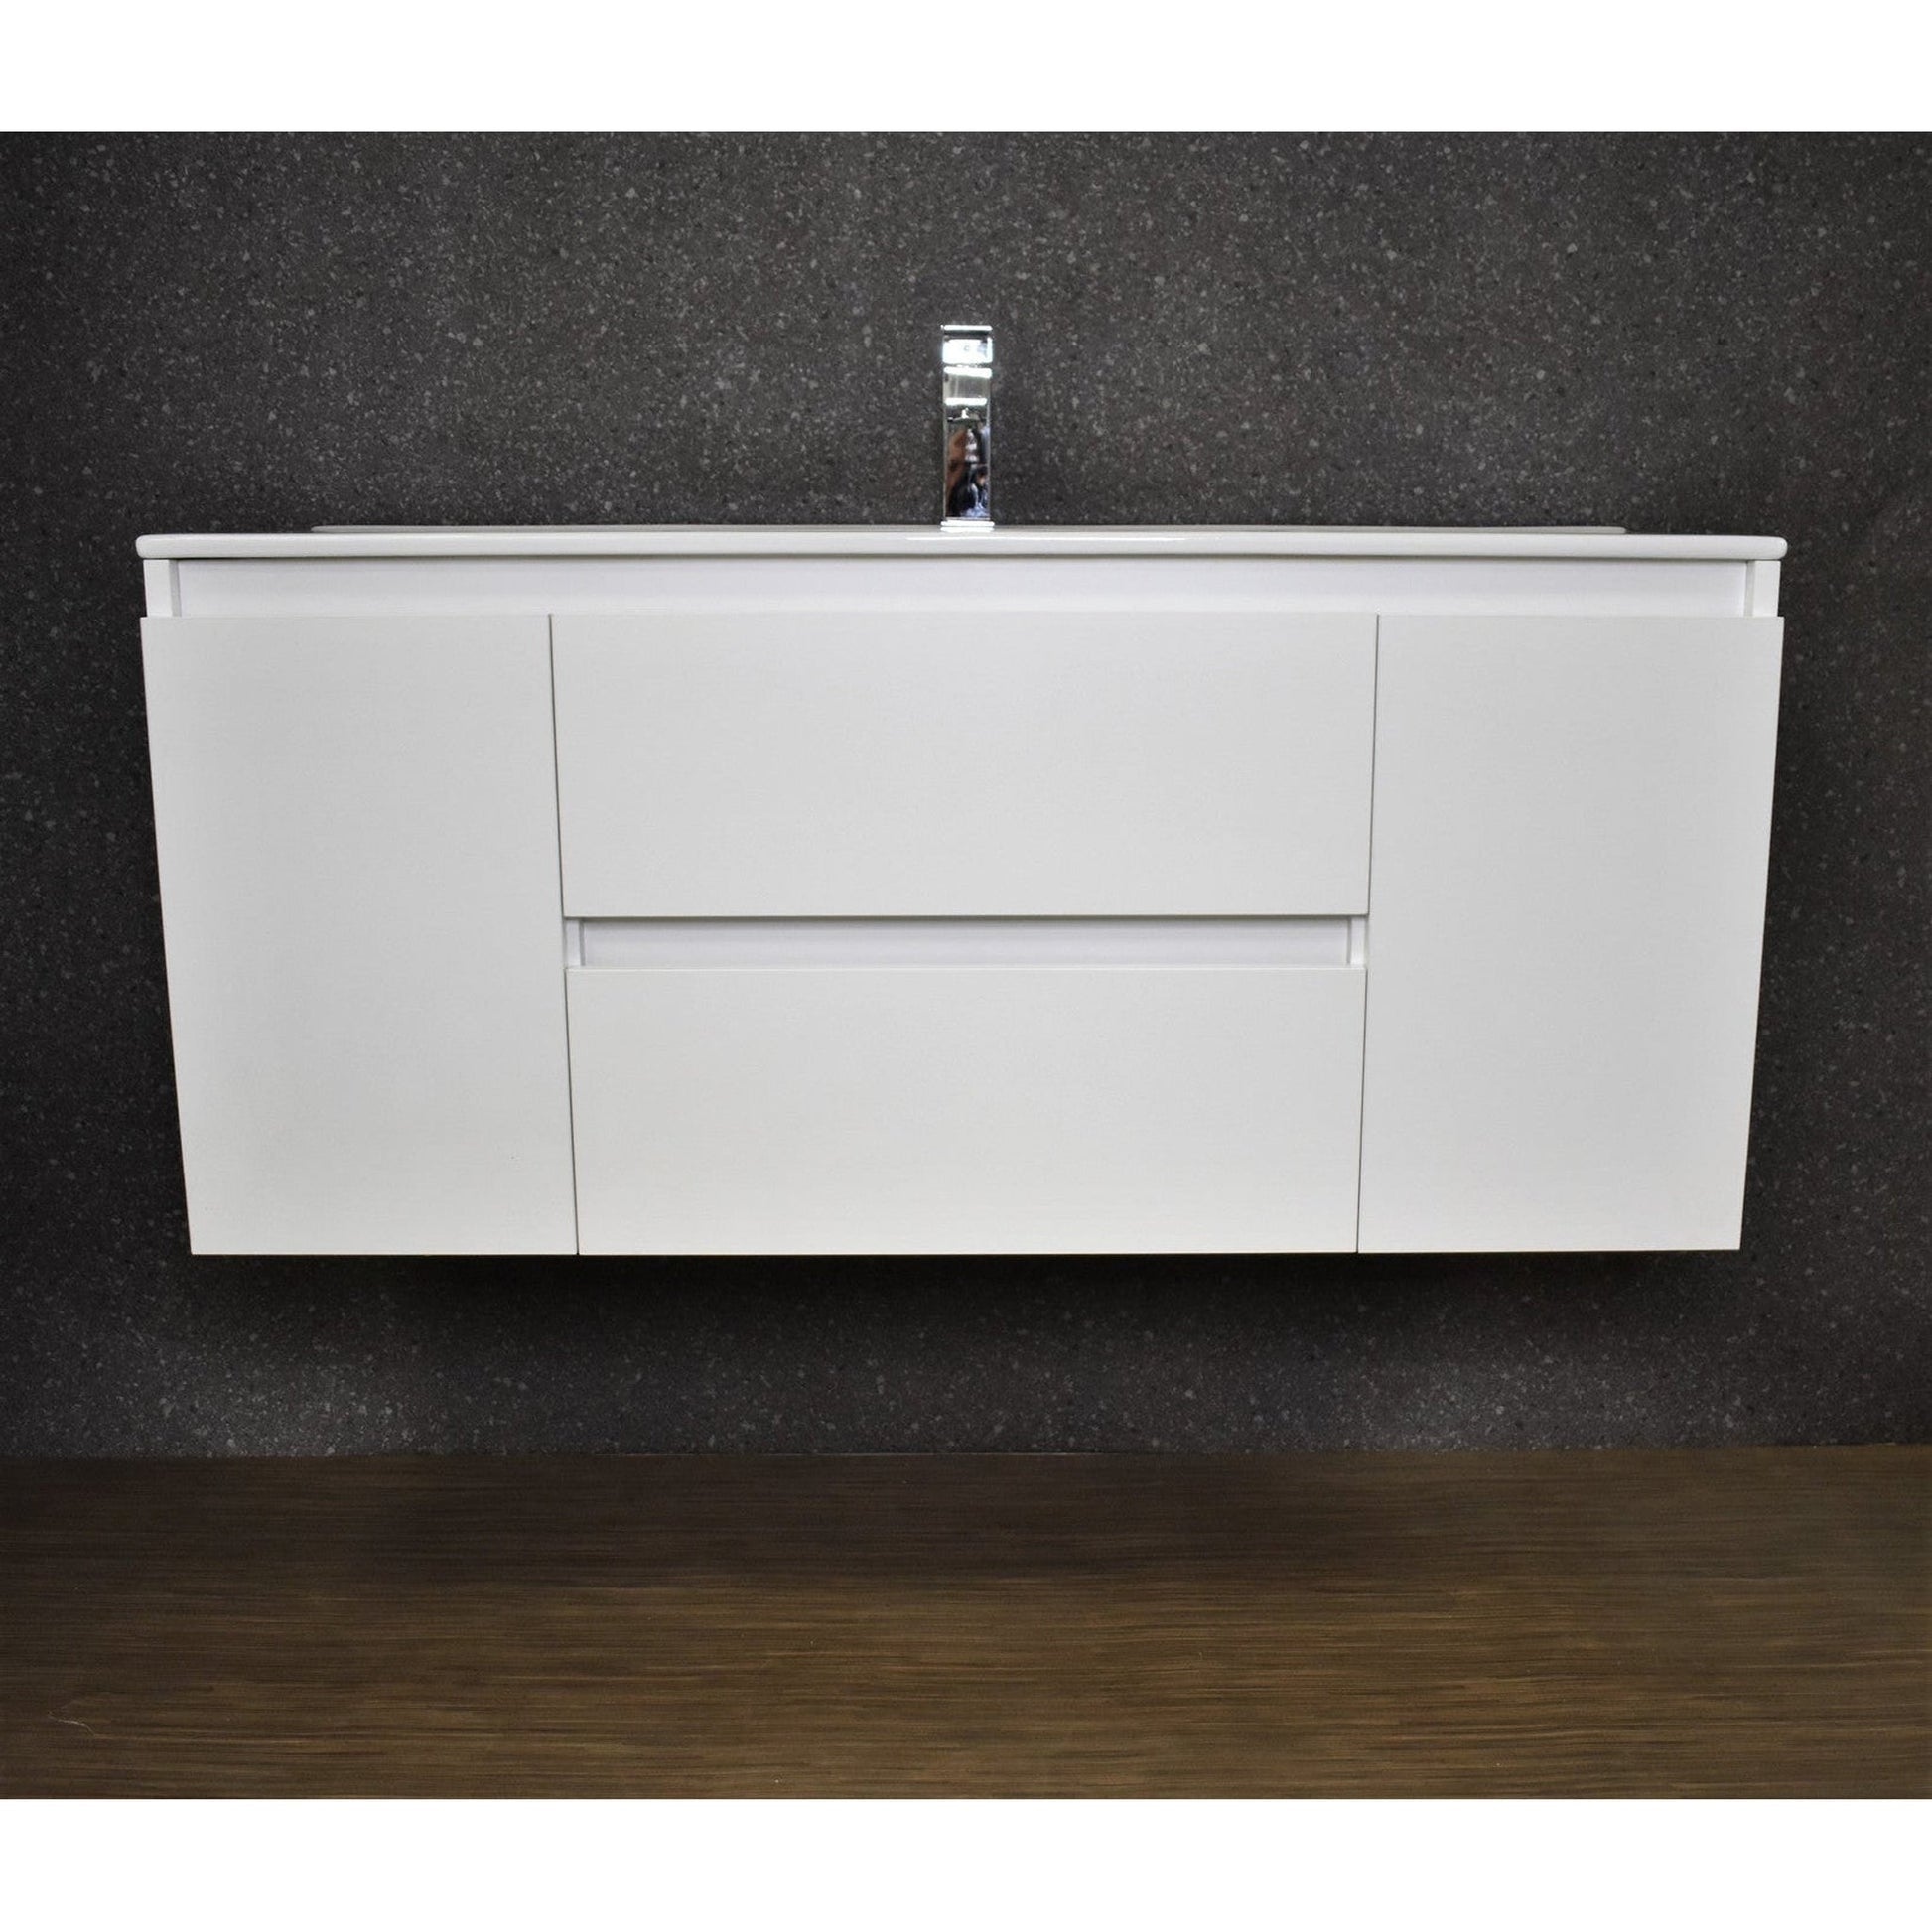 Volpa USA Salt 48" x 18" Glossy White Wall-Mounted Floating Bathroom Vanity With Drawers, Integrated Porcelain Ceramic Top and Integrated Ceramic Sink